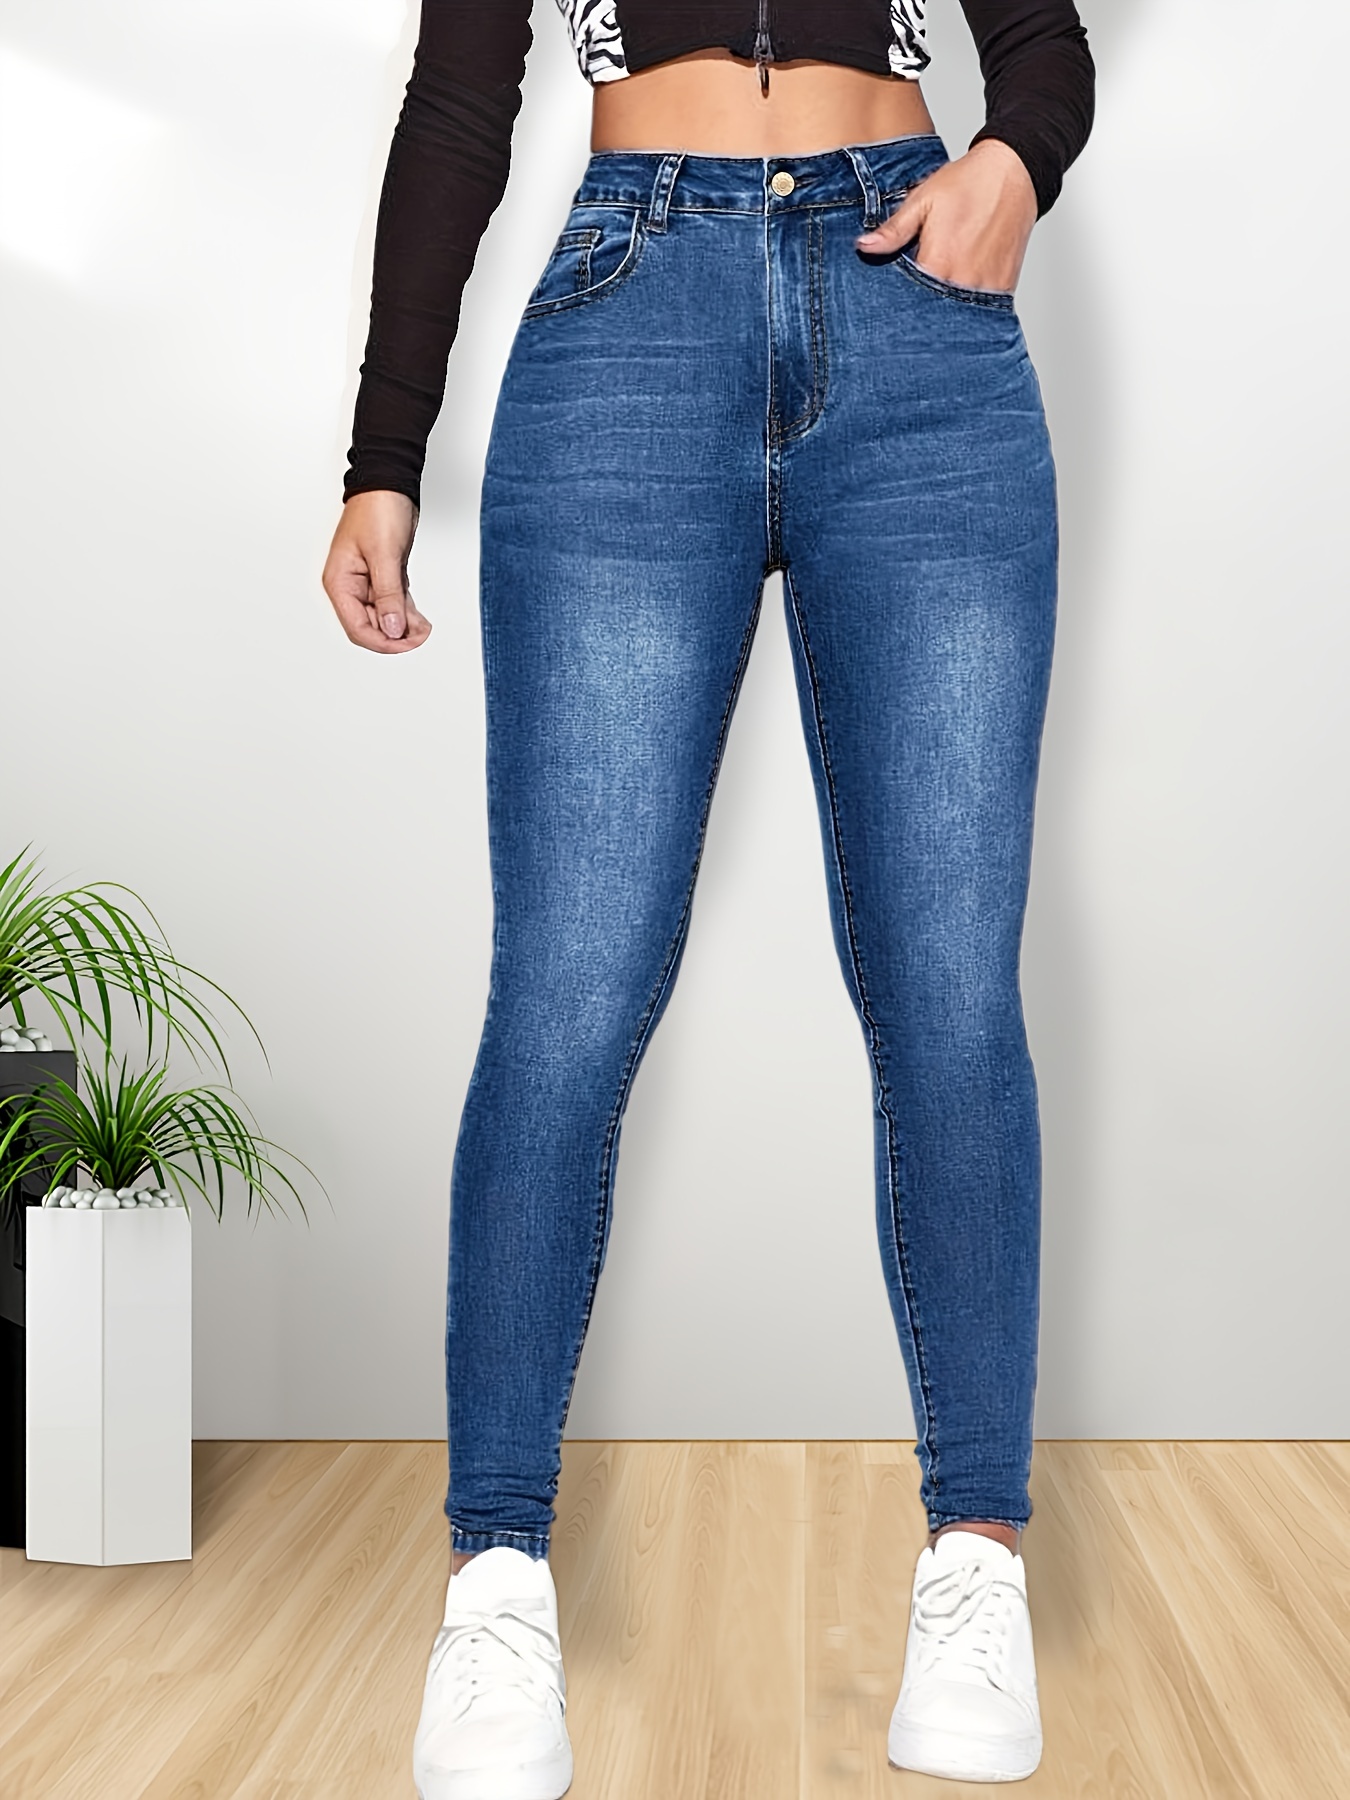 Skinny Jeans for Women Slim Fit Jeans Low Rise Jeans Plus Size